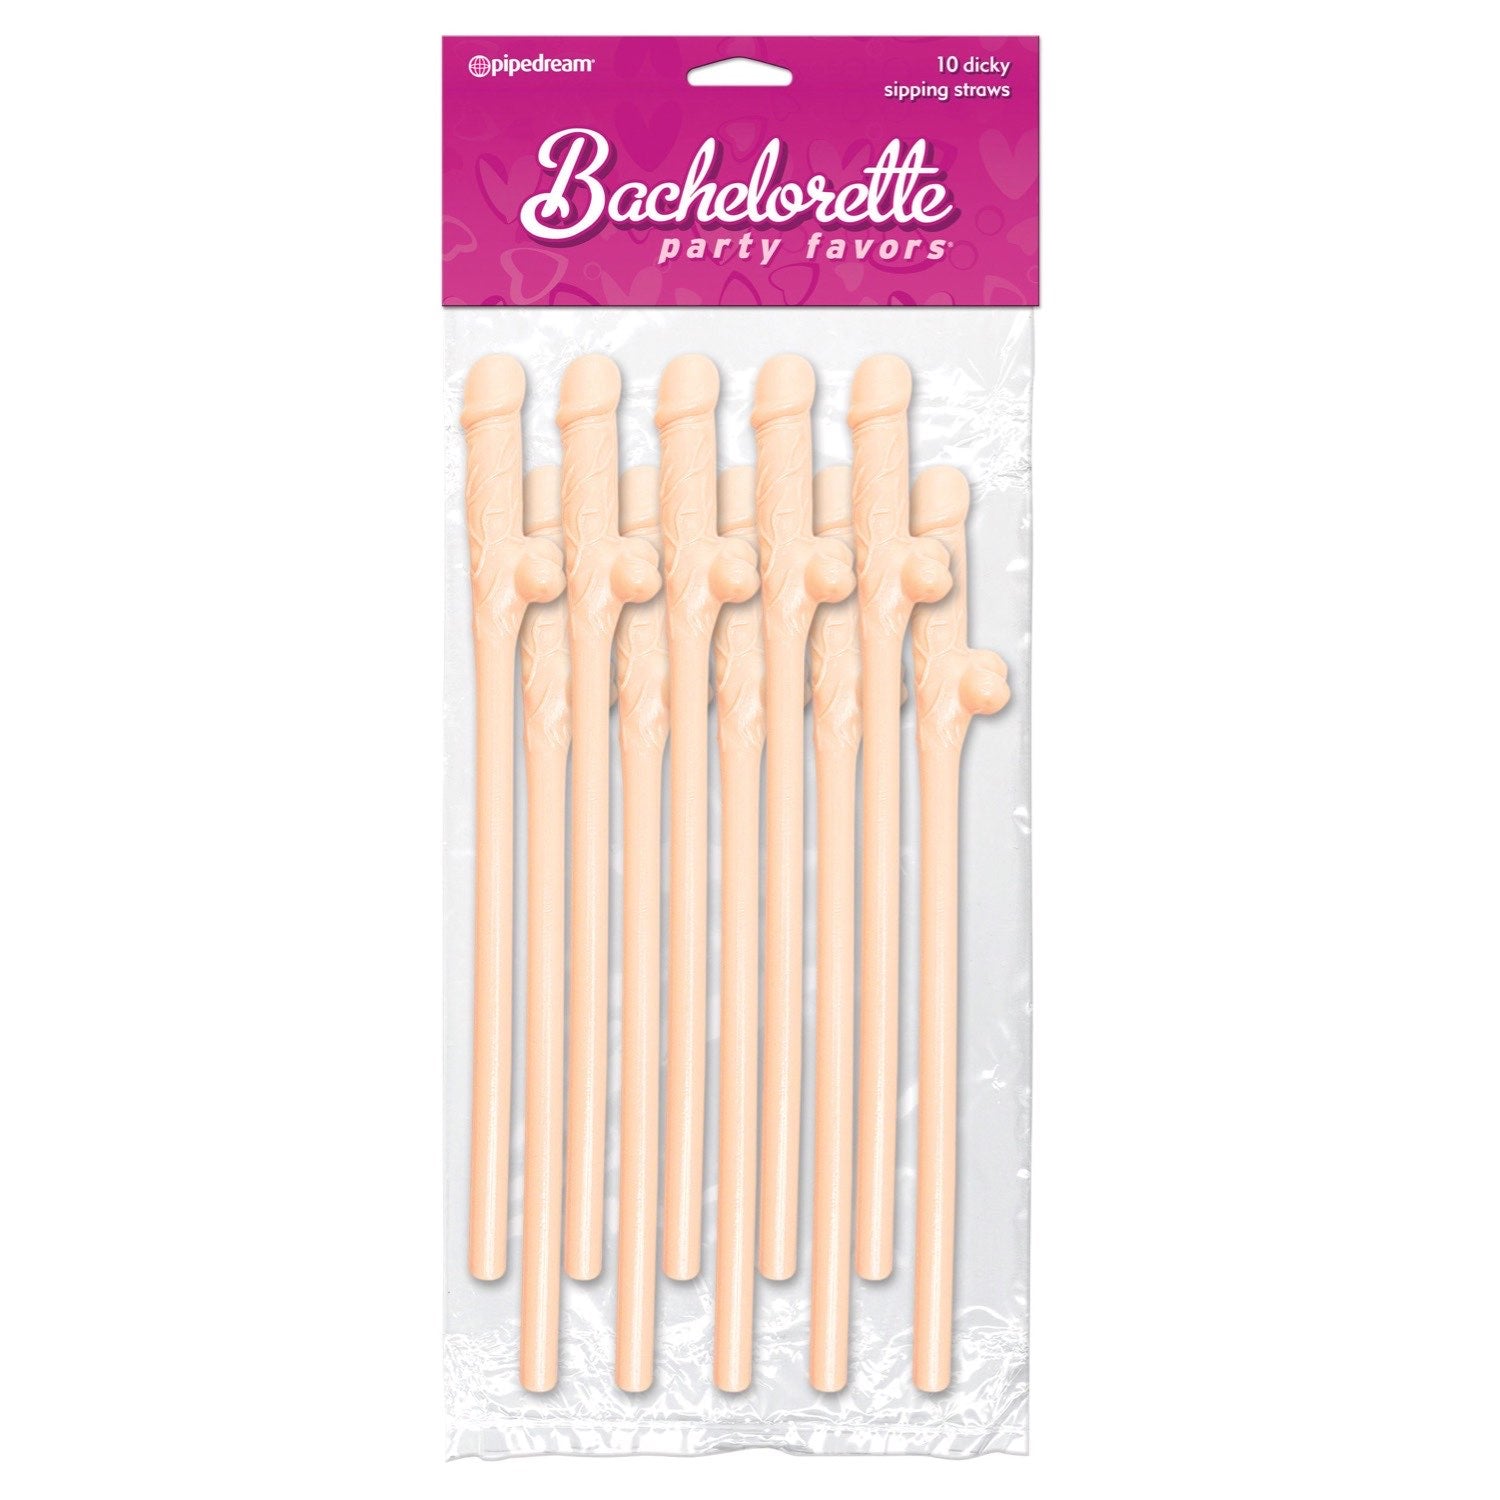 Bachelorette Party Favors Dicky Sipping Straws - Flesh Straws - Set of 10 by Pipedream